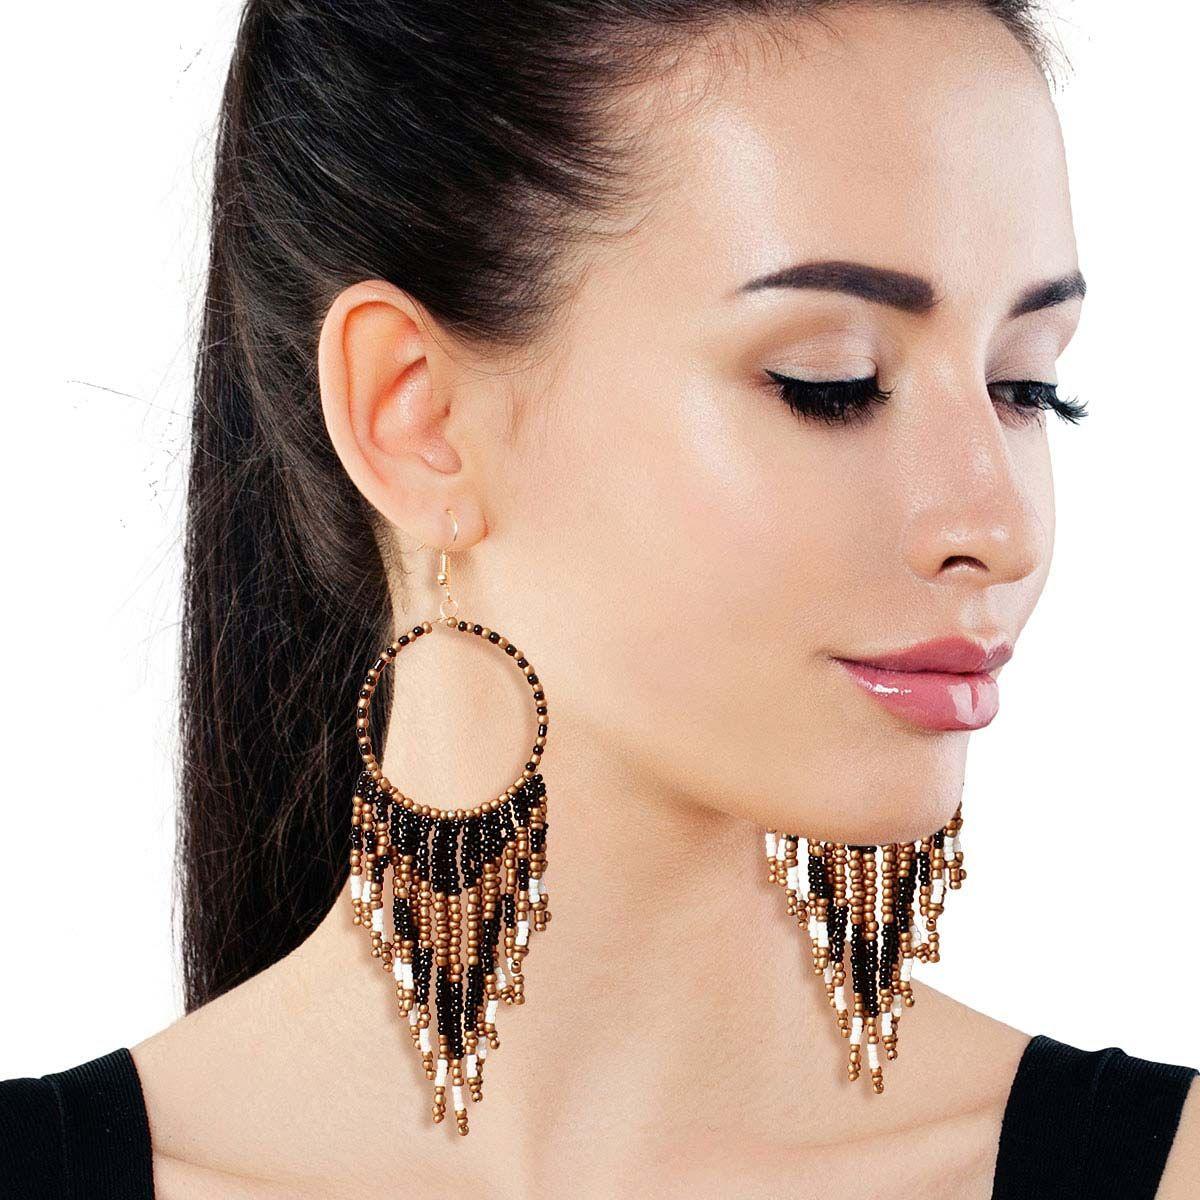 Add Some Glam to Your Look with Black & Gold Bead Fringe Dangle Earrings